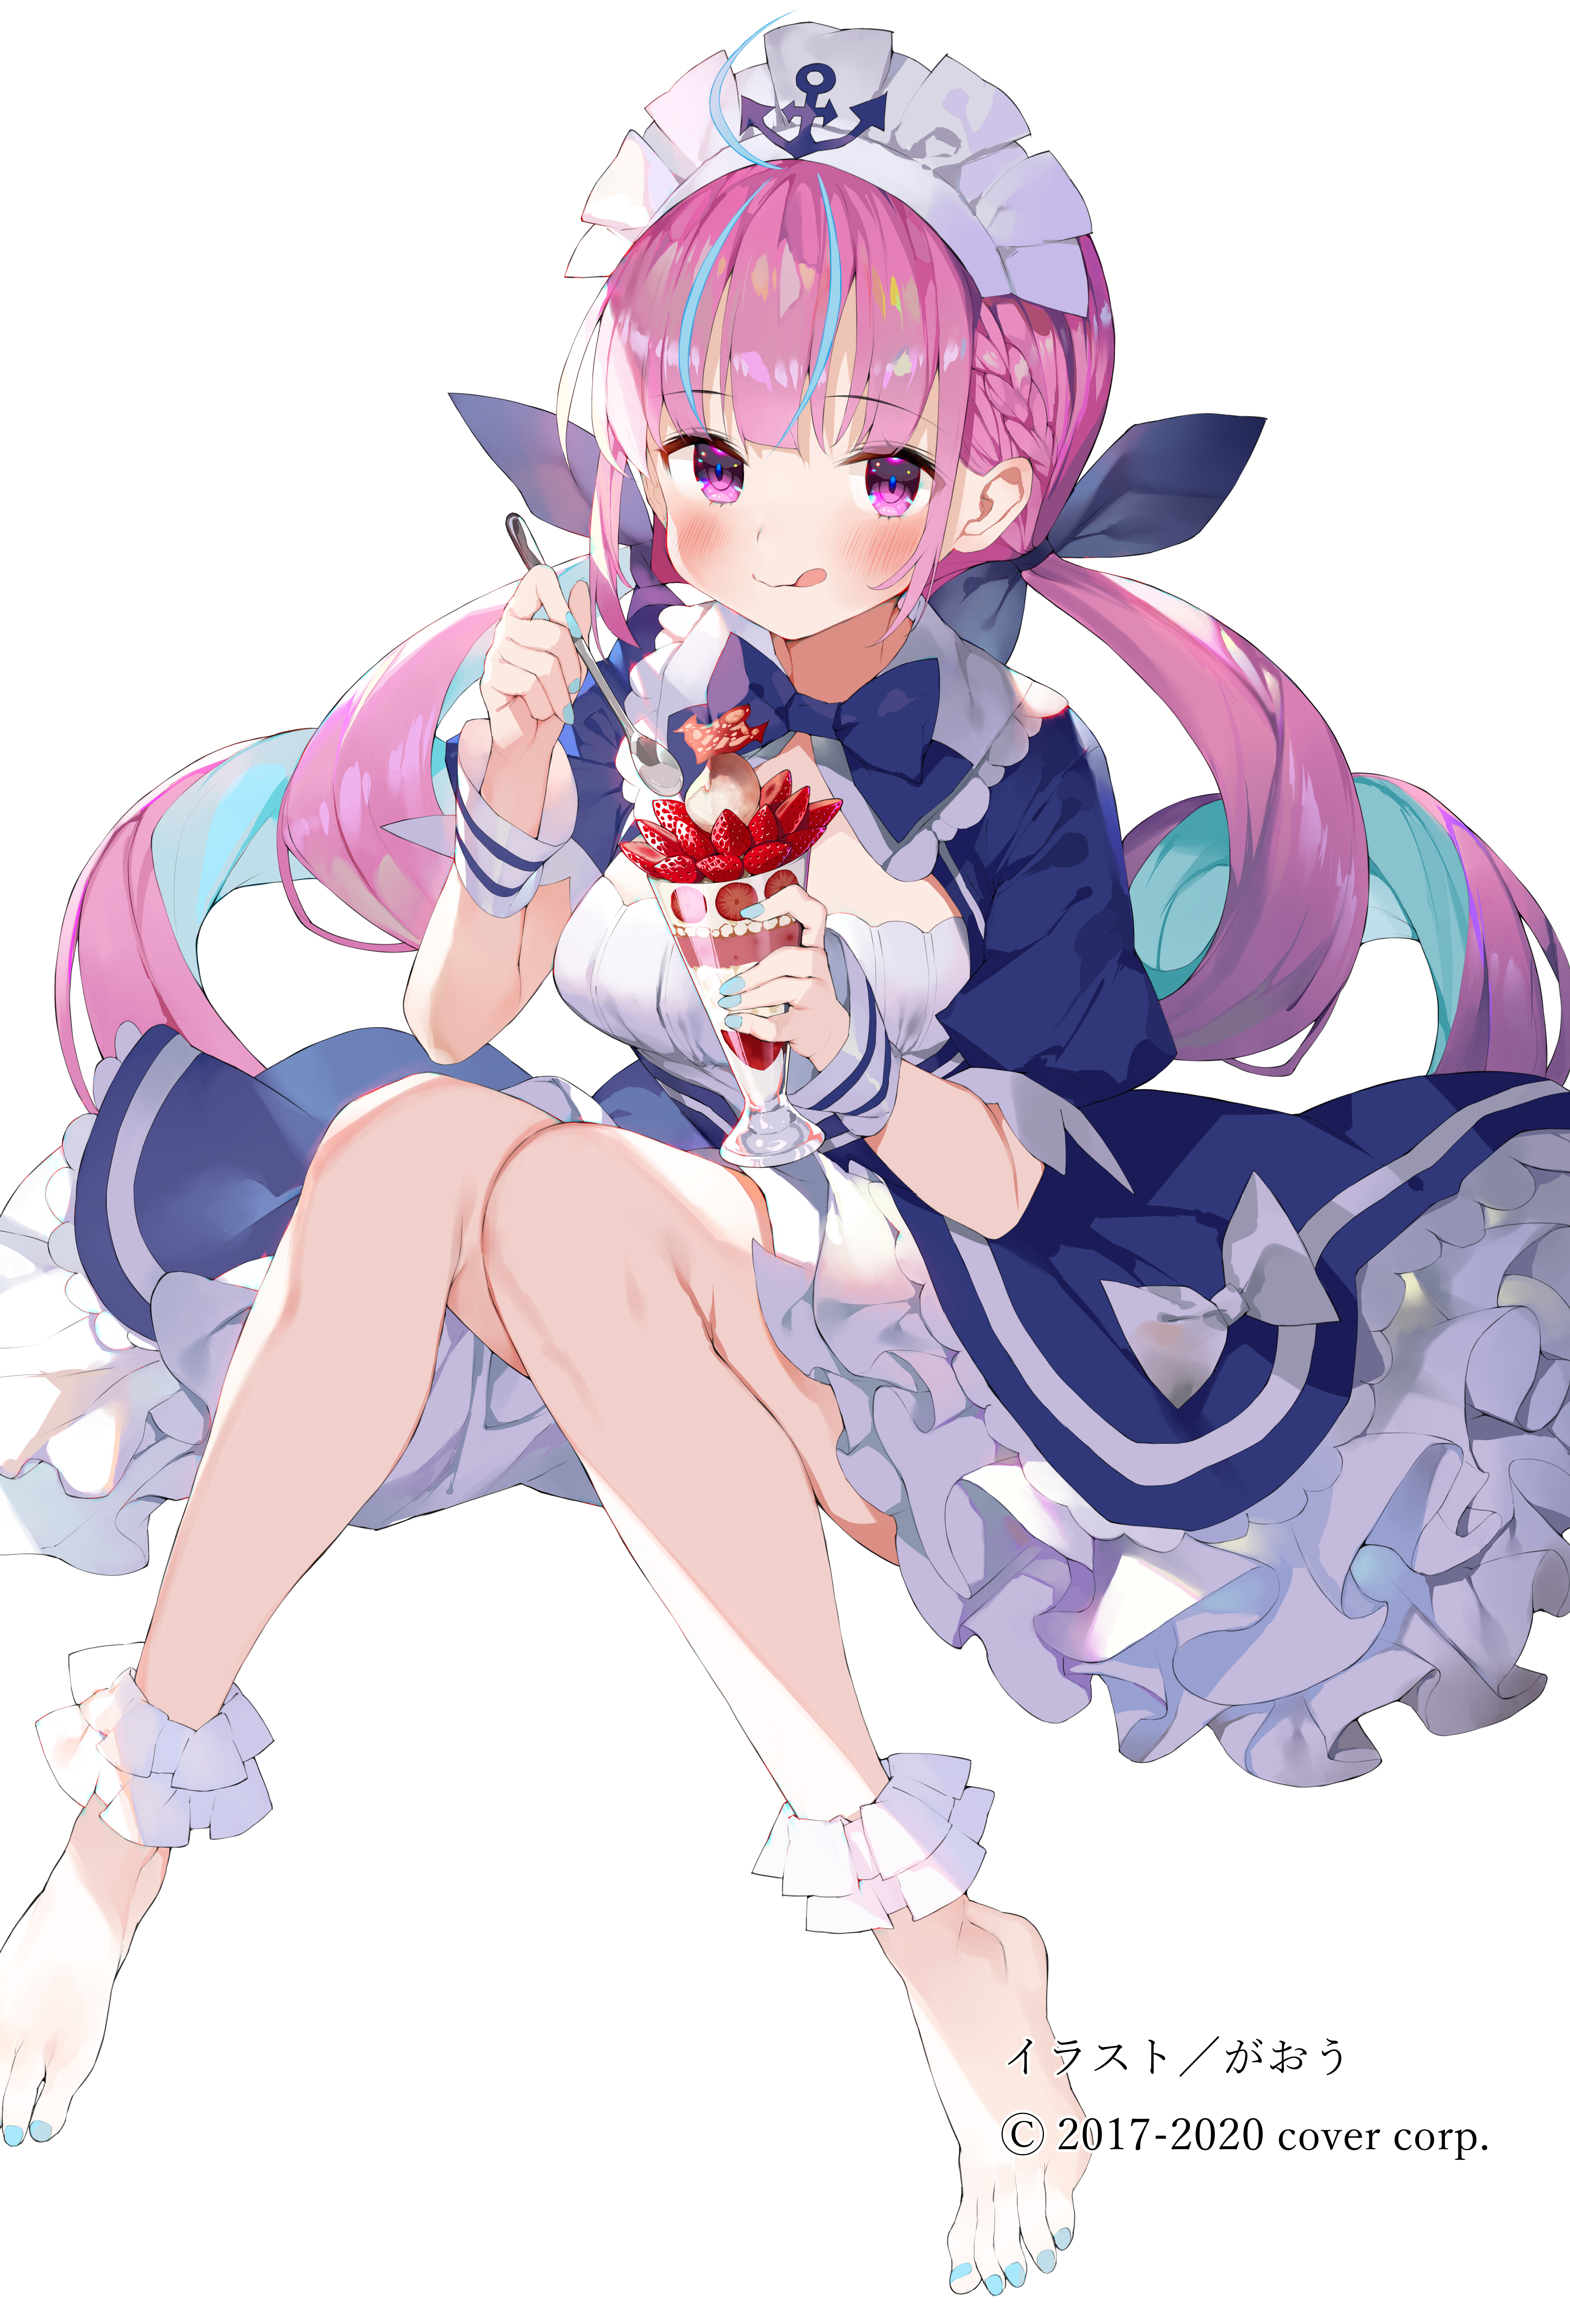 Anime 5184x7676 anime anime girls digital art artwork portrait display 2D Hololive Virtual Youtuber Minato Aqua Gaou multi-colored hair pink hair purple eyes tongue out ice cream maid outfit waitress barefoot twintails